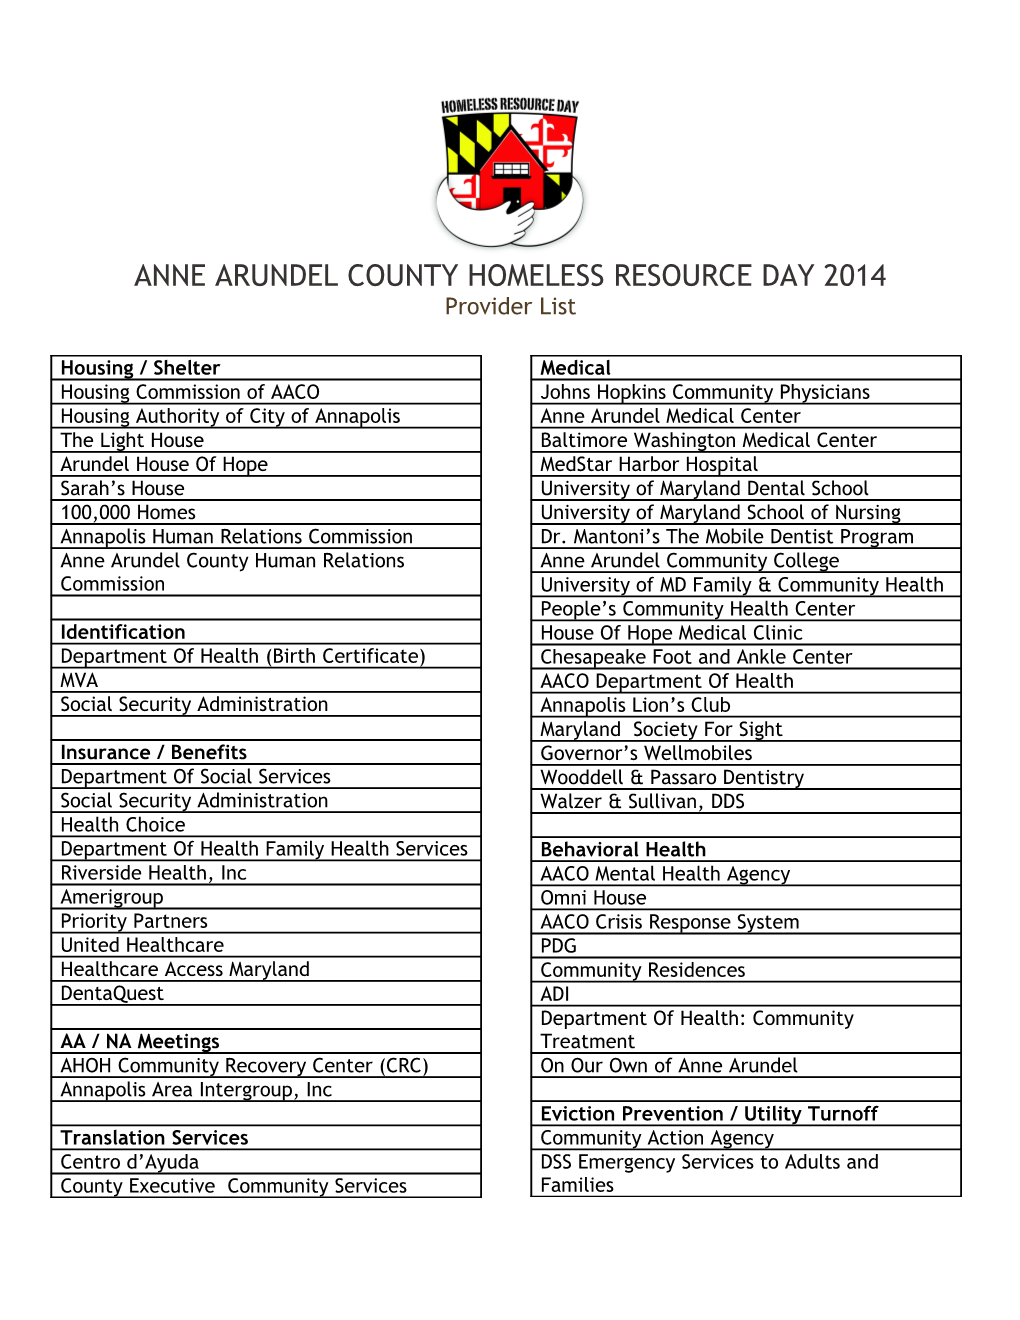 Anne Arundel County Homeless Resource Day 2014